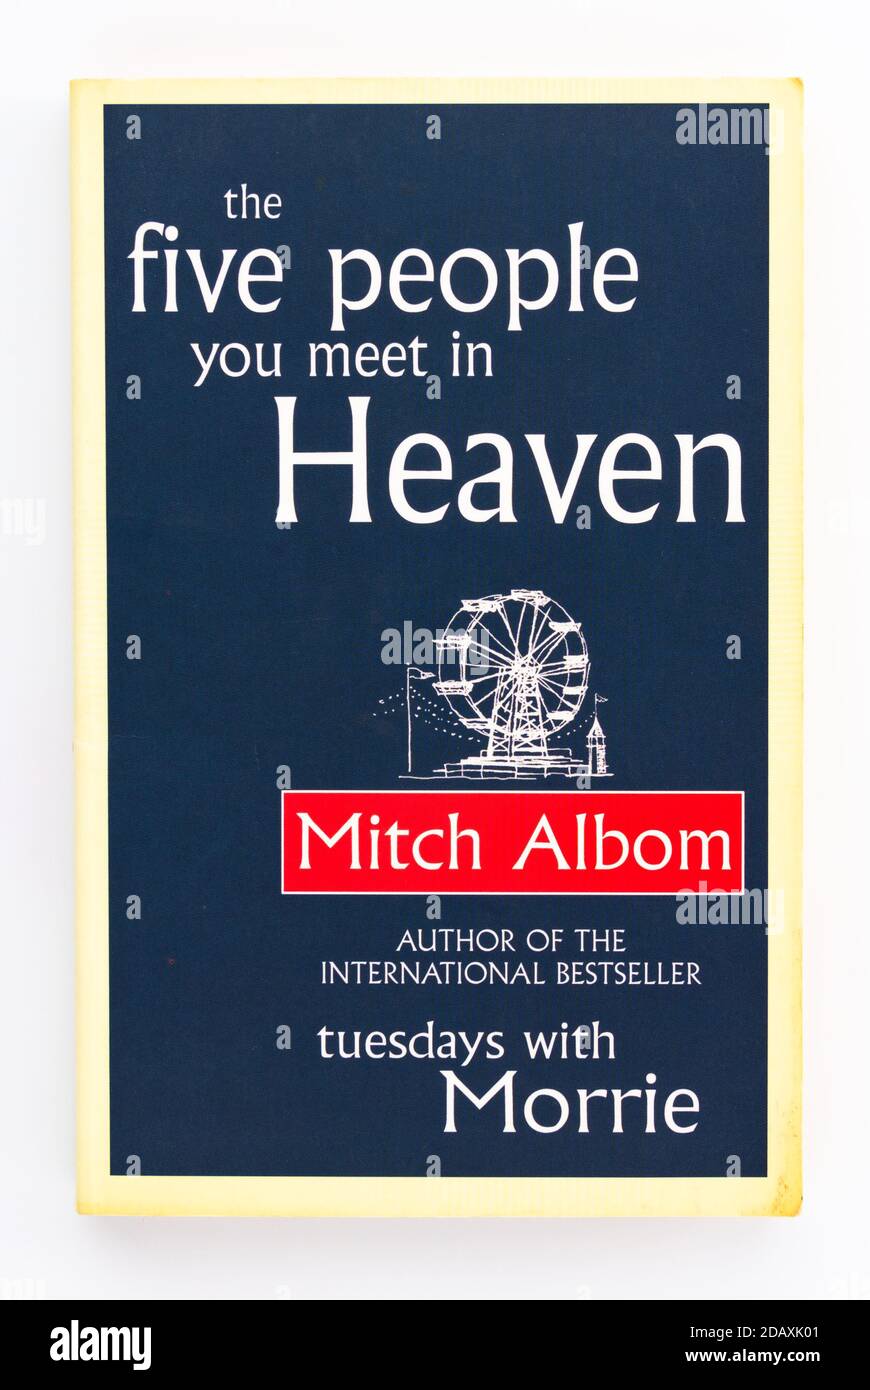 The Five People you meet in Heaven by Mitch Albom Stock Photo